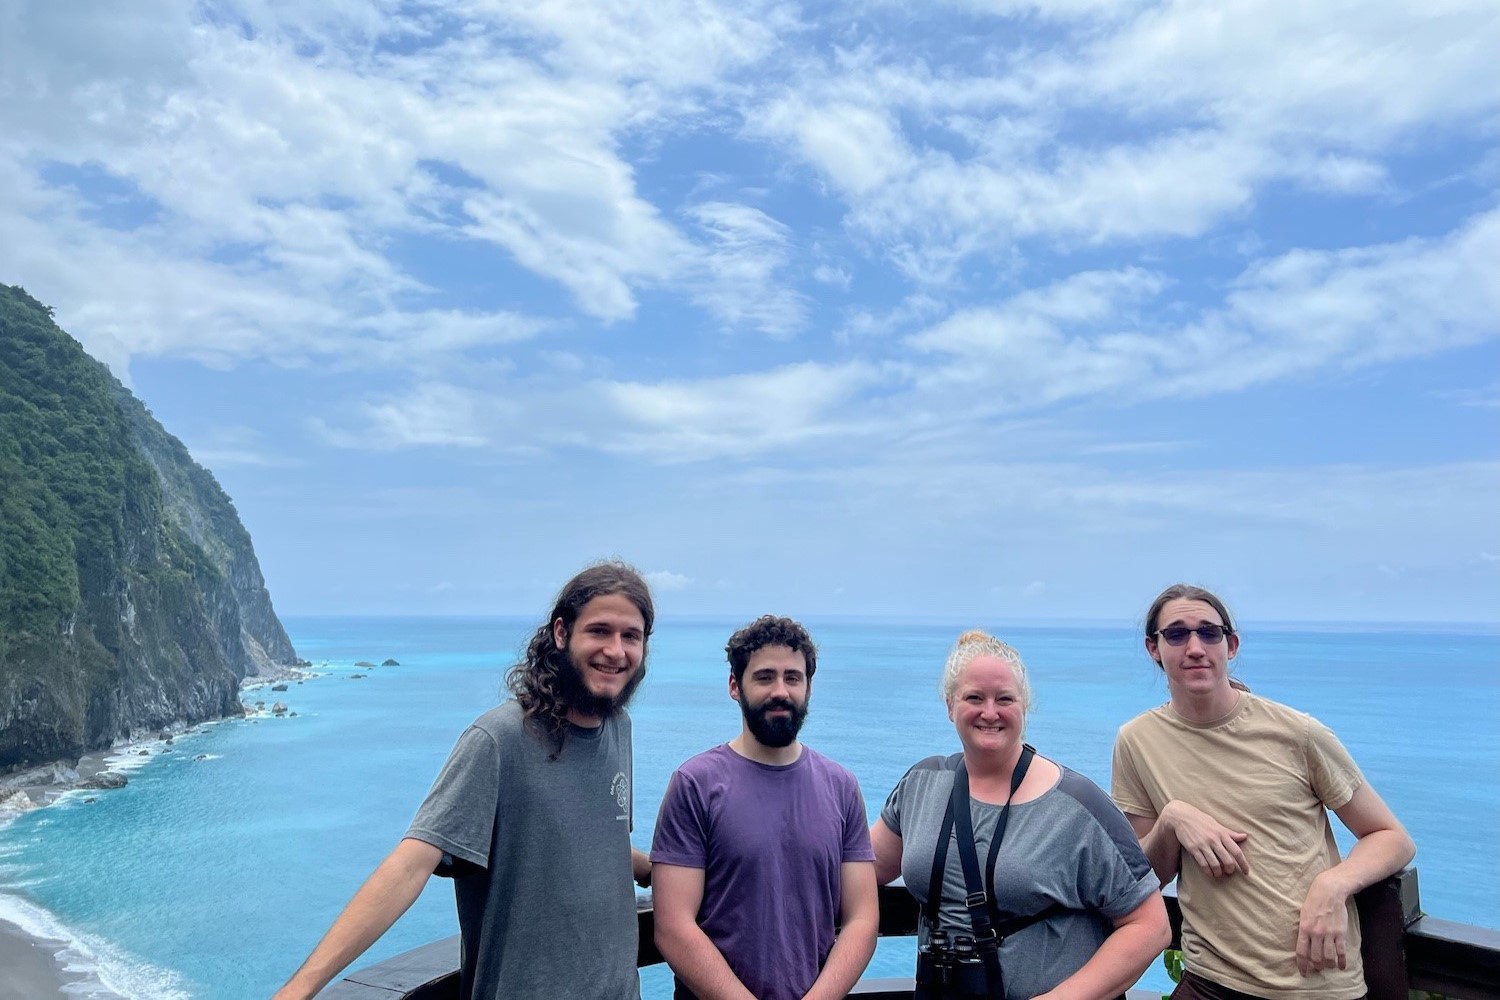 Dr. Mary Kidd and students posing off coast of Taiwan